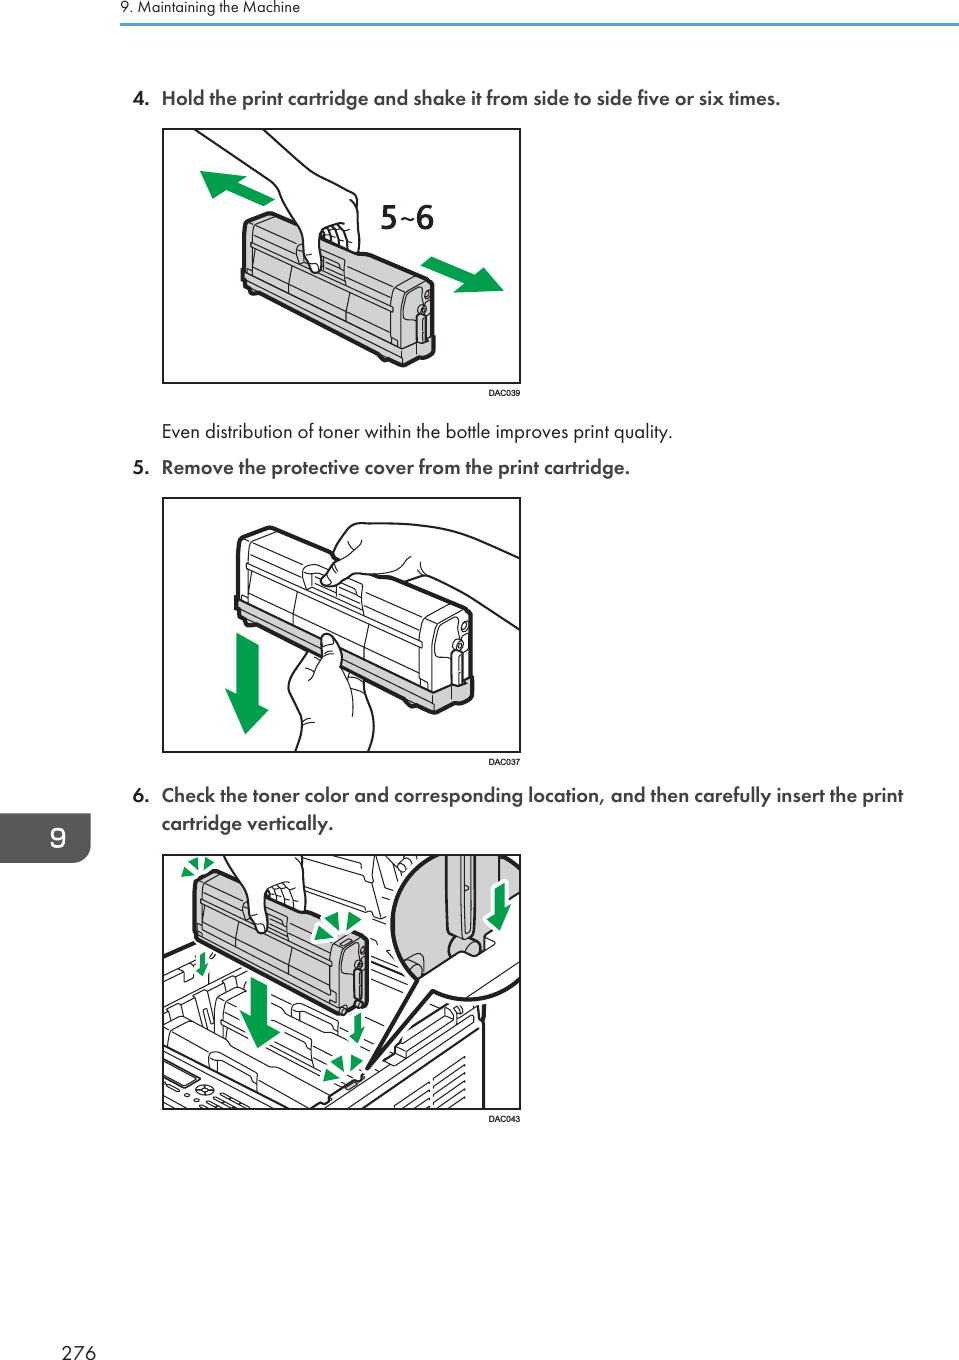 4. Hold the print cartridge and shake it from side to side five or six times.DAC039Even distribution of toner within the bottle improves print quality.5. Remove the protective cover from the print cartridge.DAC0376. Check the toner color and corresponding location, and then carefully insert the printcartridge vertically.DAC0439. Maintaining the Machine276